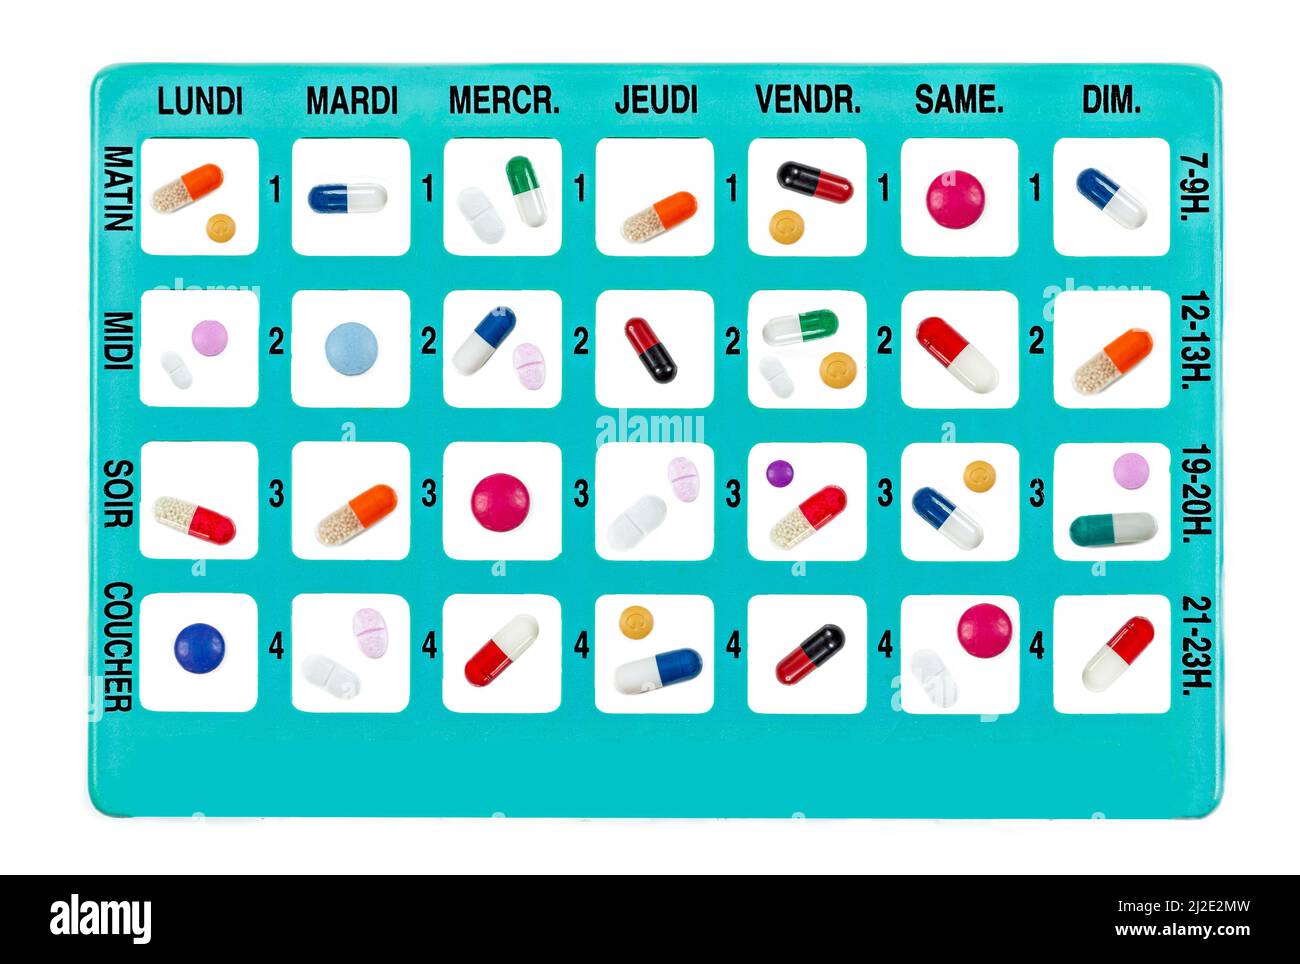 Weekly medicines set in a pillbox for daily use in french Stock Photo